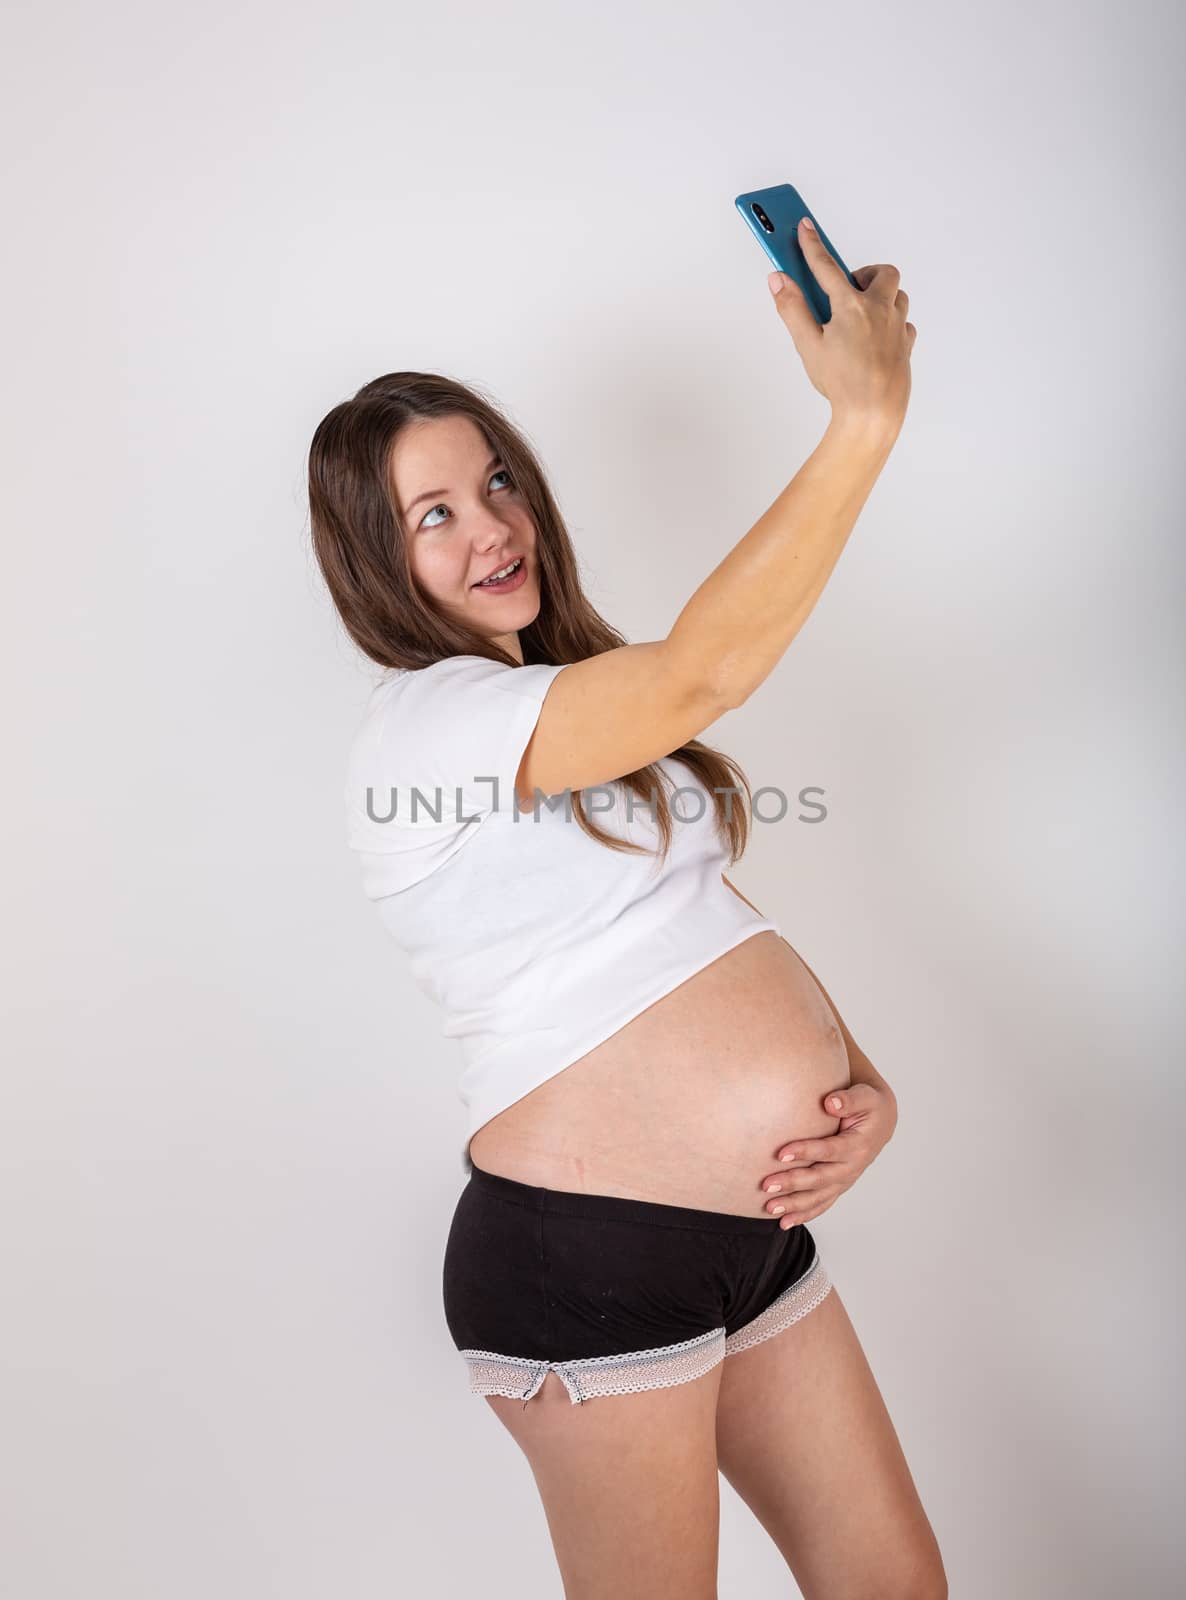 Cute pregnant woman on the phone while lying on a white background.